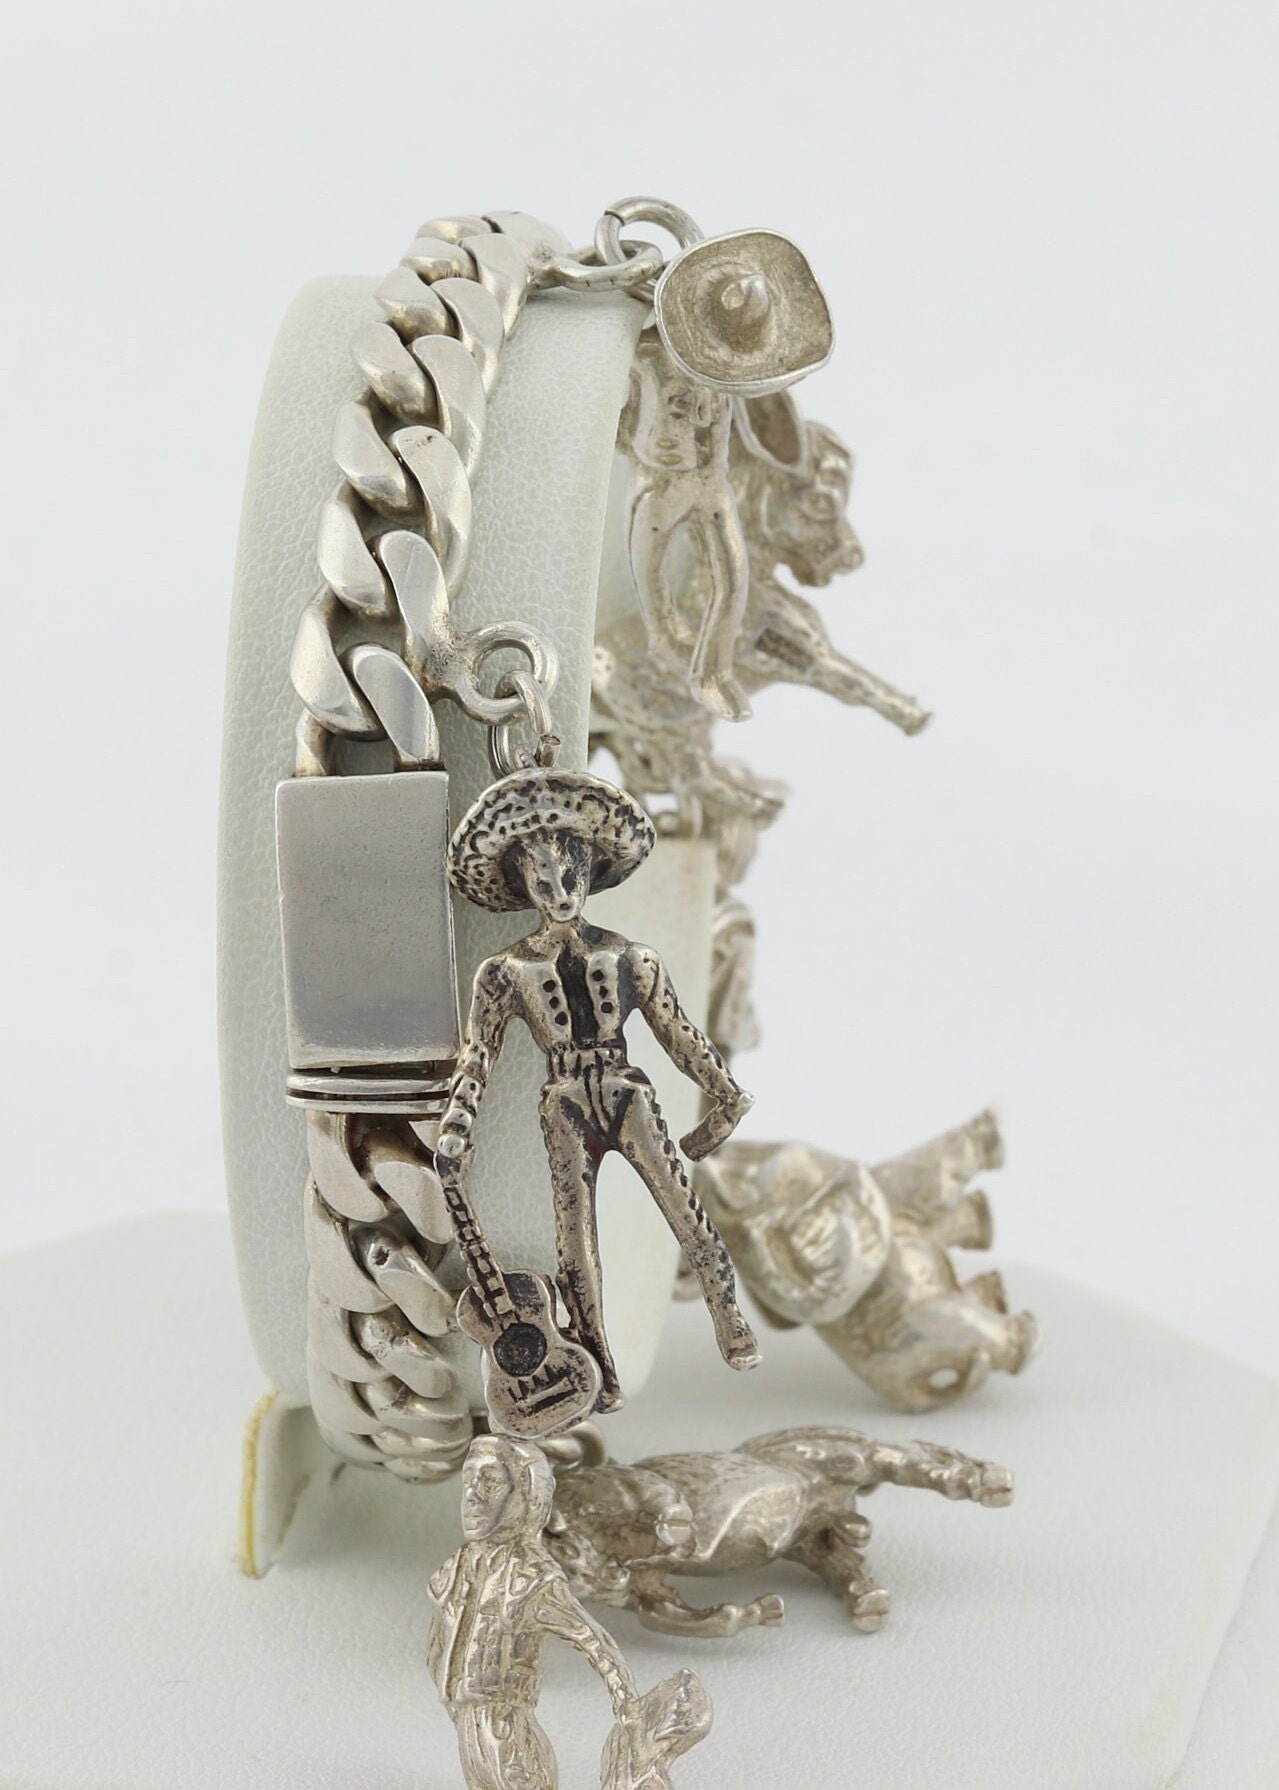 ERAS Sterling Silver Mexican Charm Bracelet Vintage 1940s Mexico